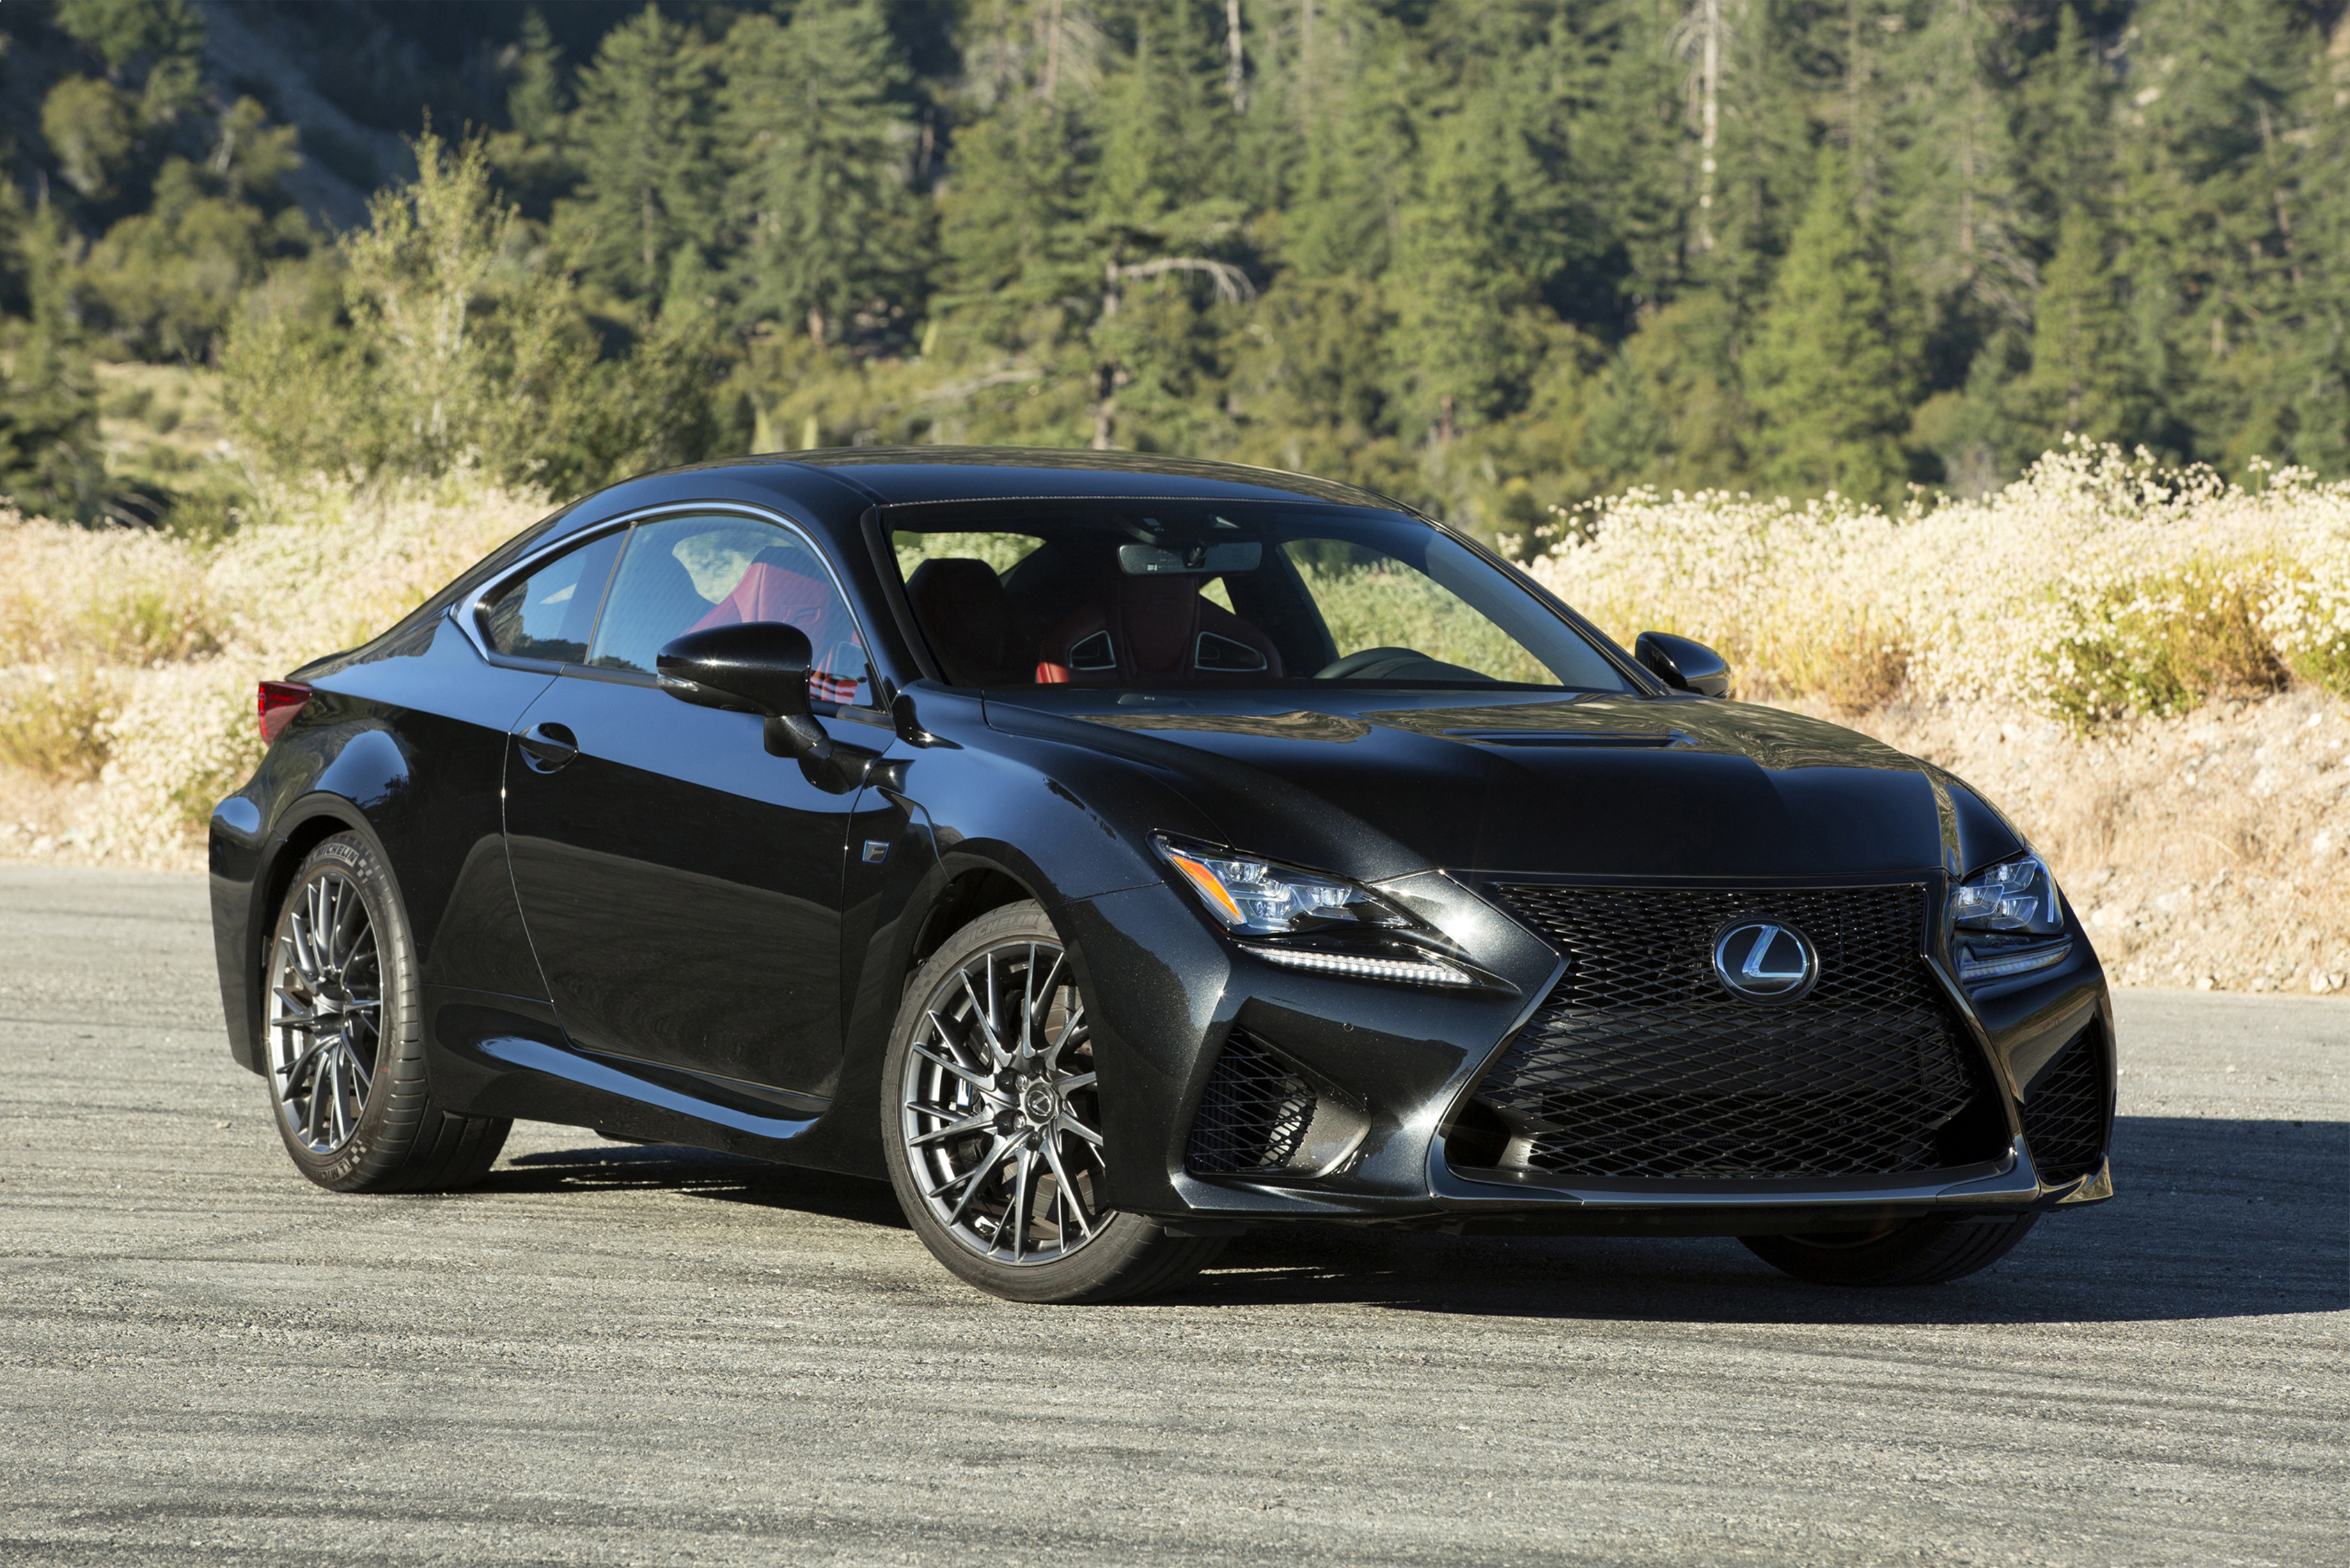 Surprise Result Is The 2019 Lexus Rc F Hot Or Not Video The Fast Lane Car